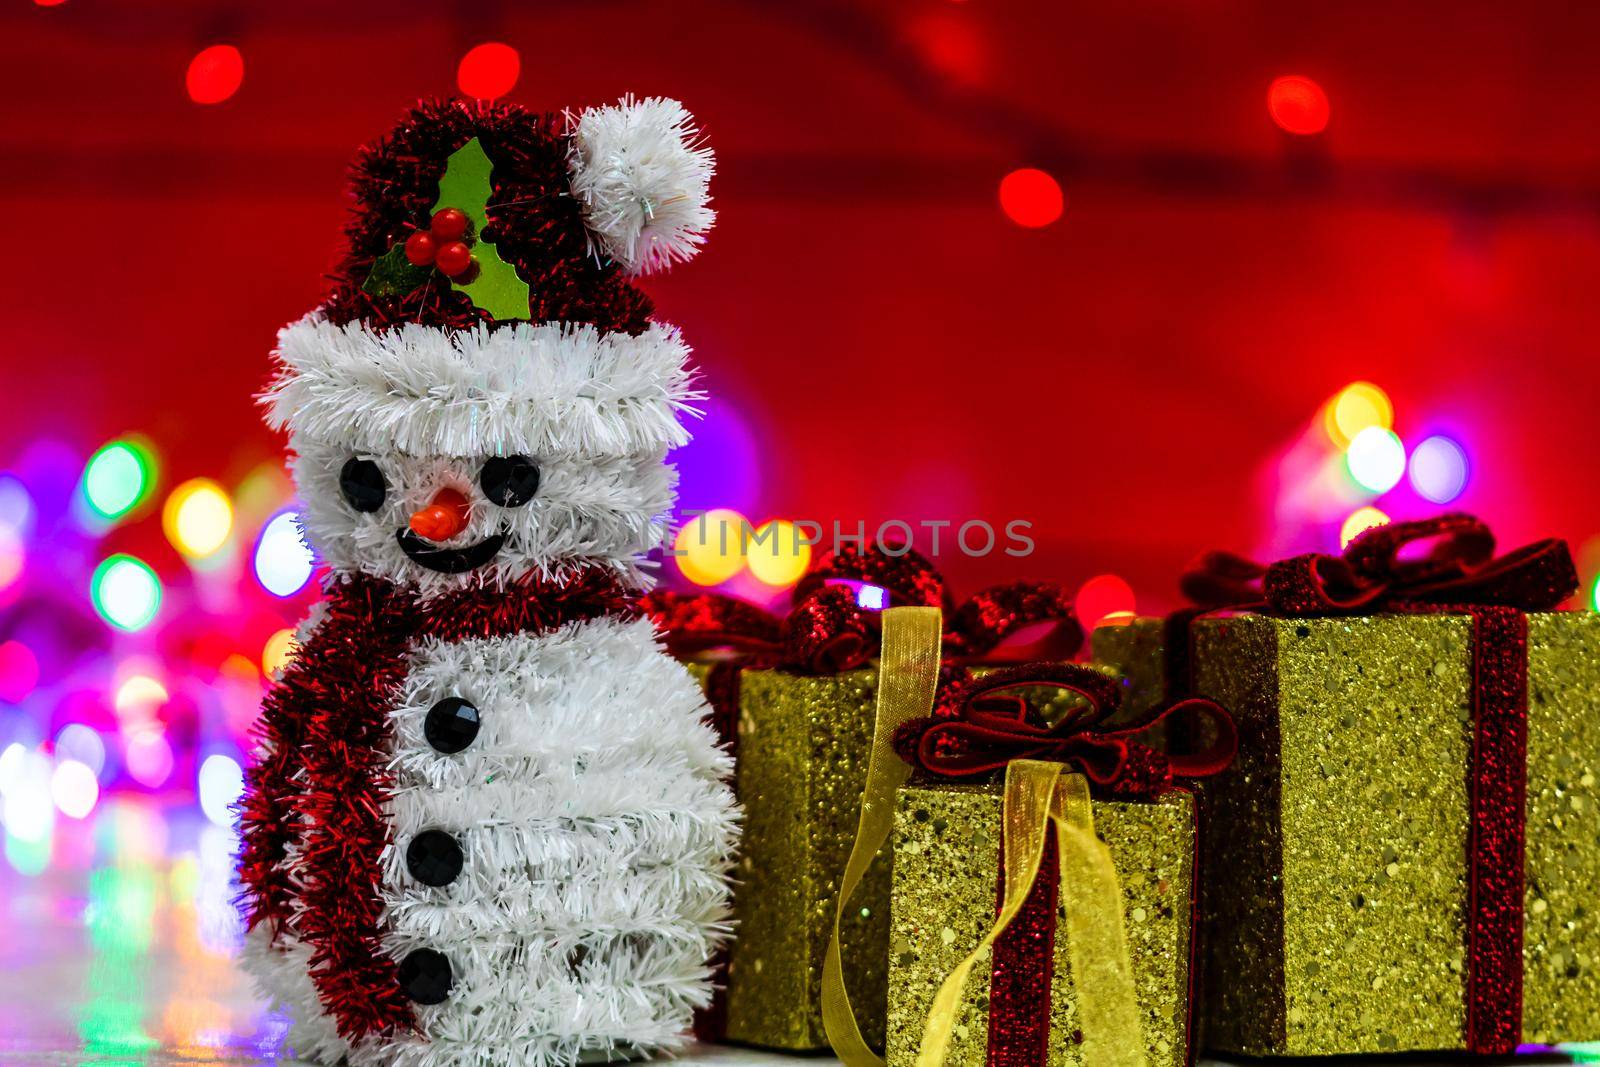 Snowman Christmas figurine near glittery gifts isolated on blurred background of lights. Christmas decorations isolated by vladispas